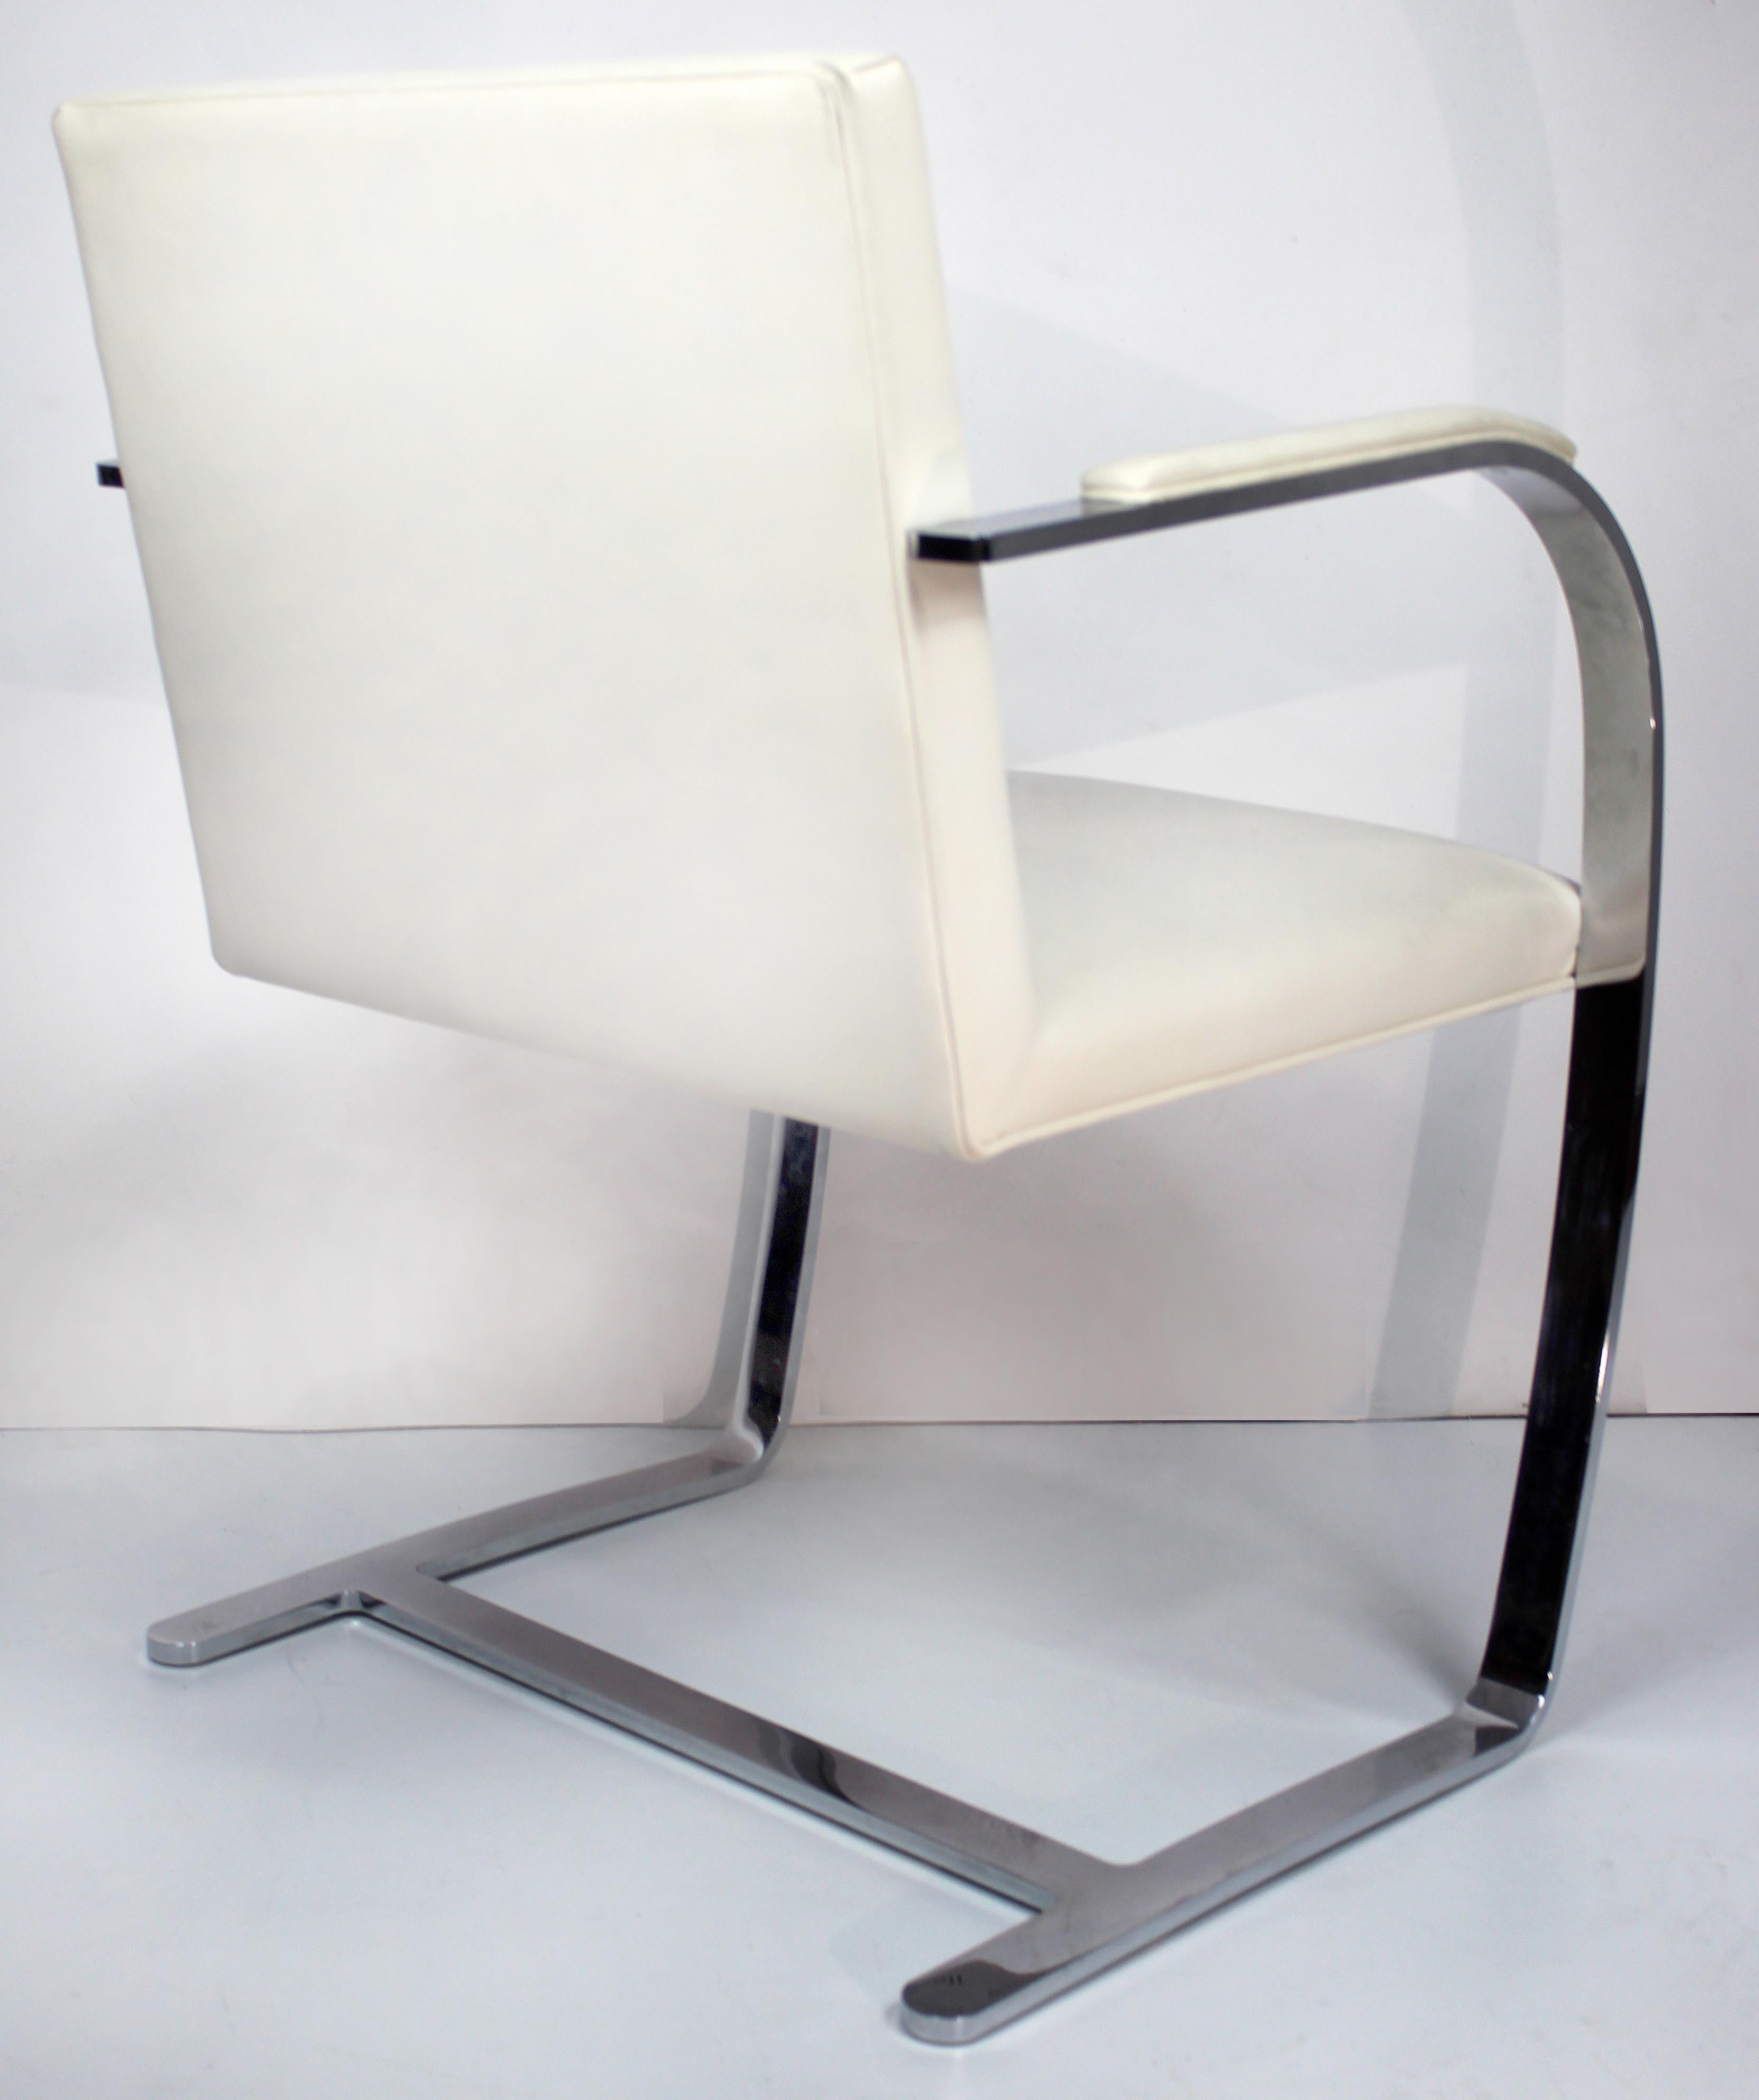 Stainless Steel Mies Van Der Rohe, Knoll Flat Bar Brno Chairs, Eggshell White Leather, Set of 4